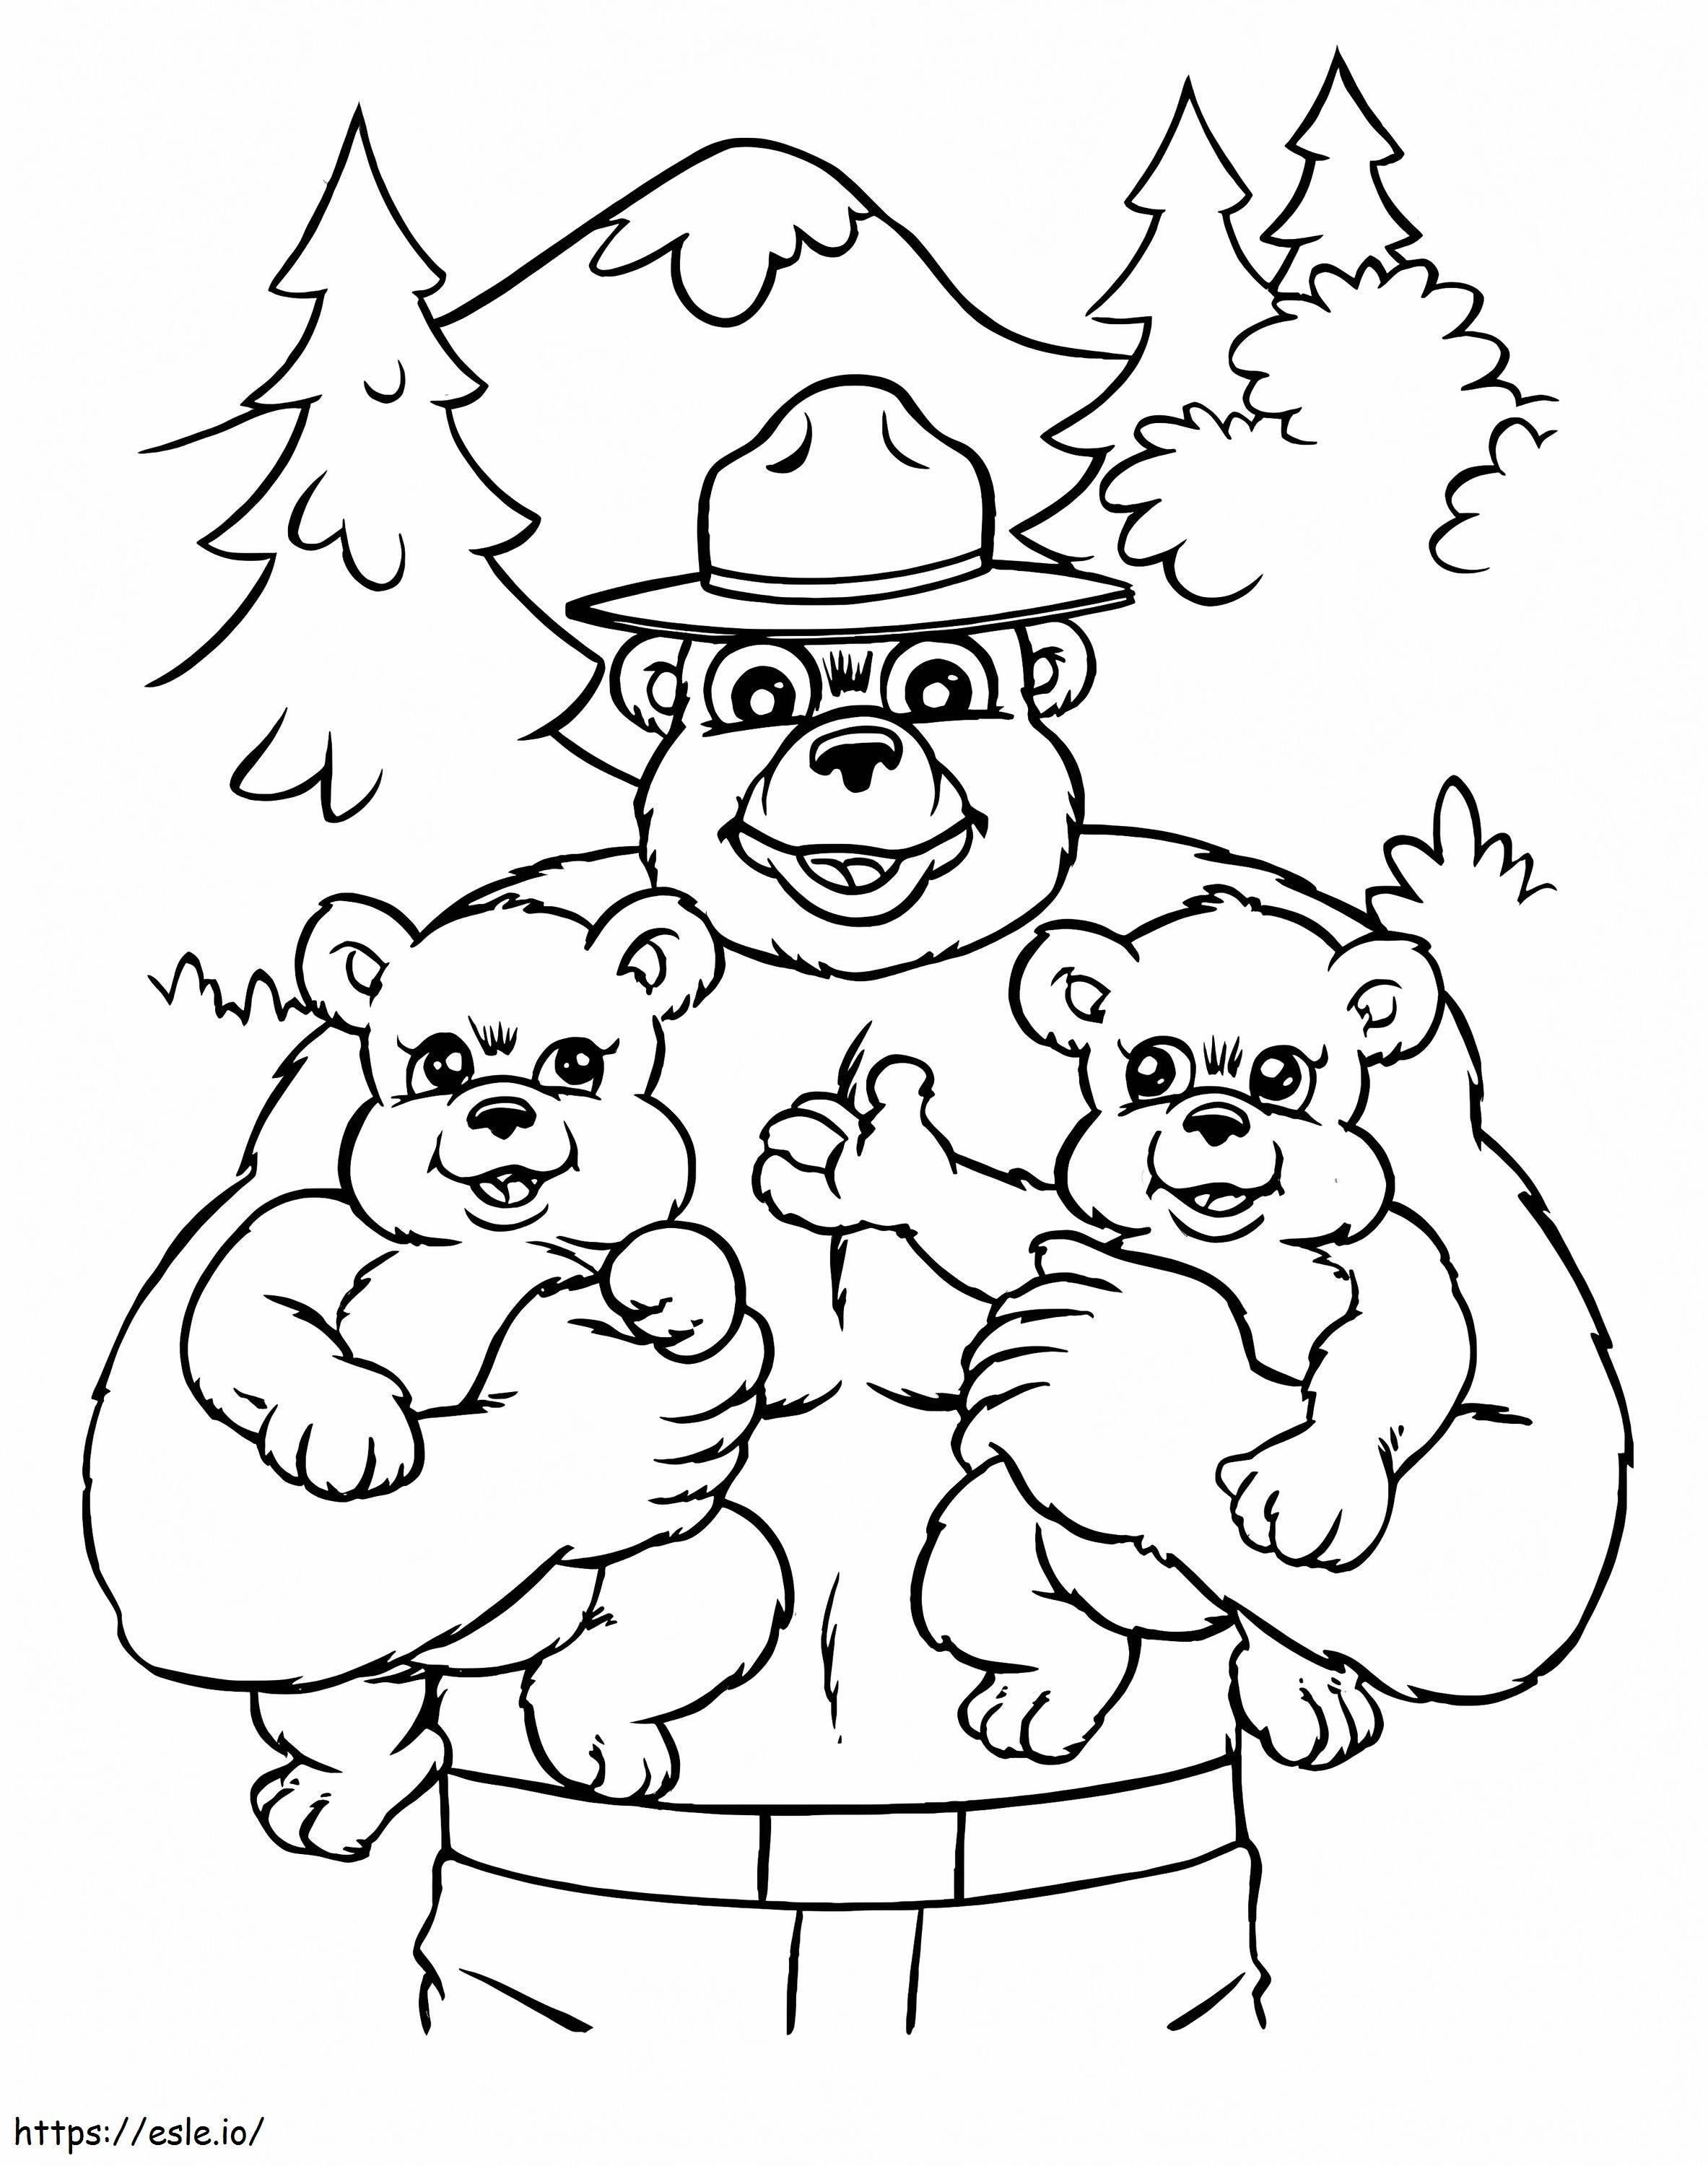 Smokey Bear And Little Bears coloring page